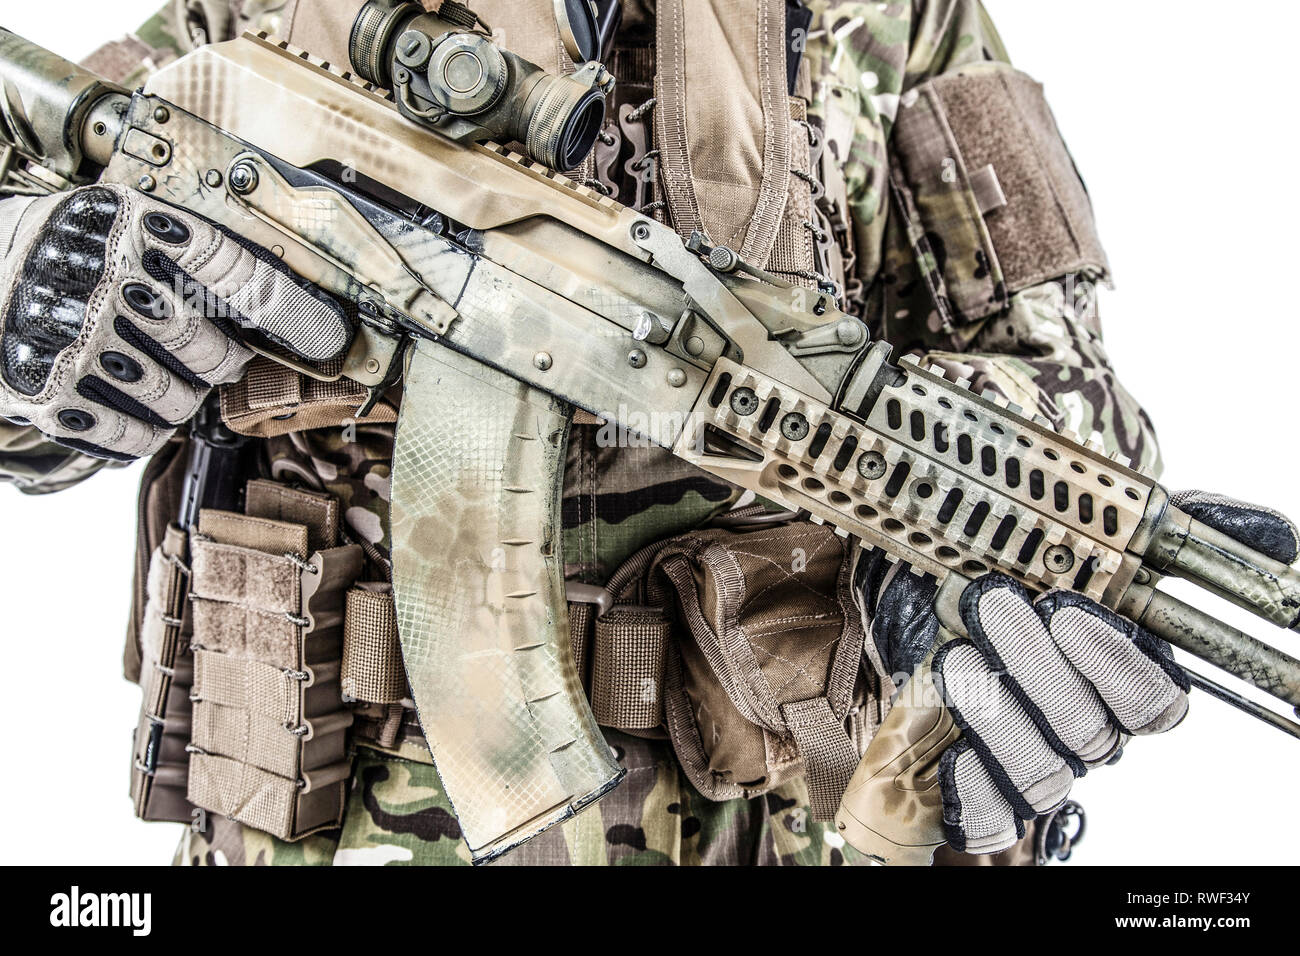 Close-up shot of Kalashnikov rifle in hands of Army special forces soldier. Stock Photo